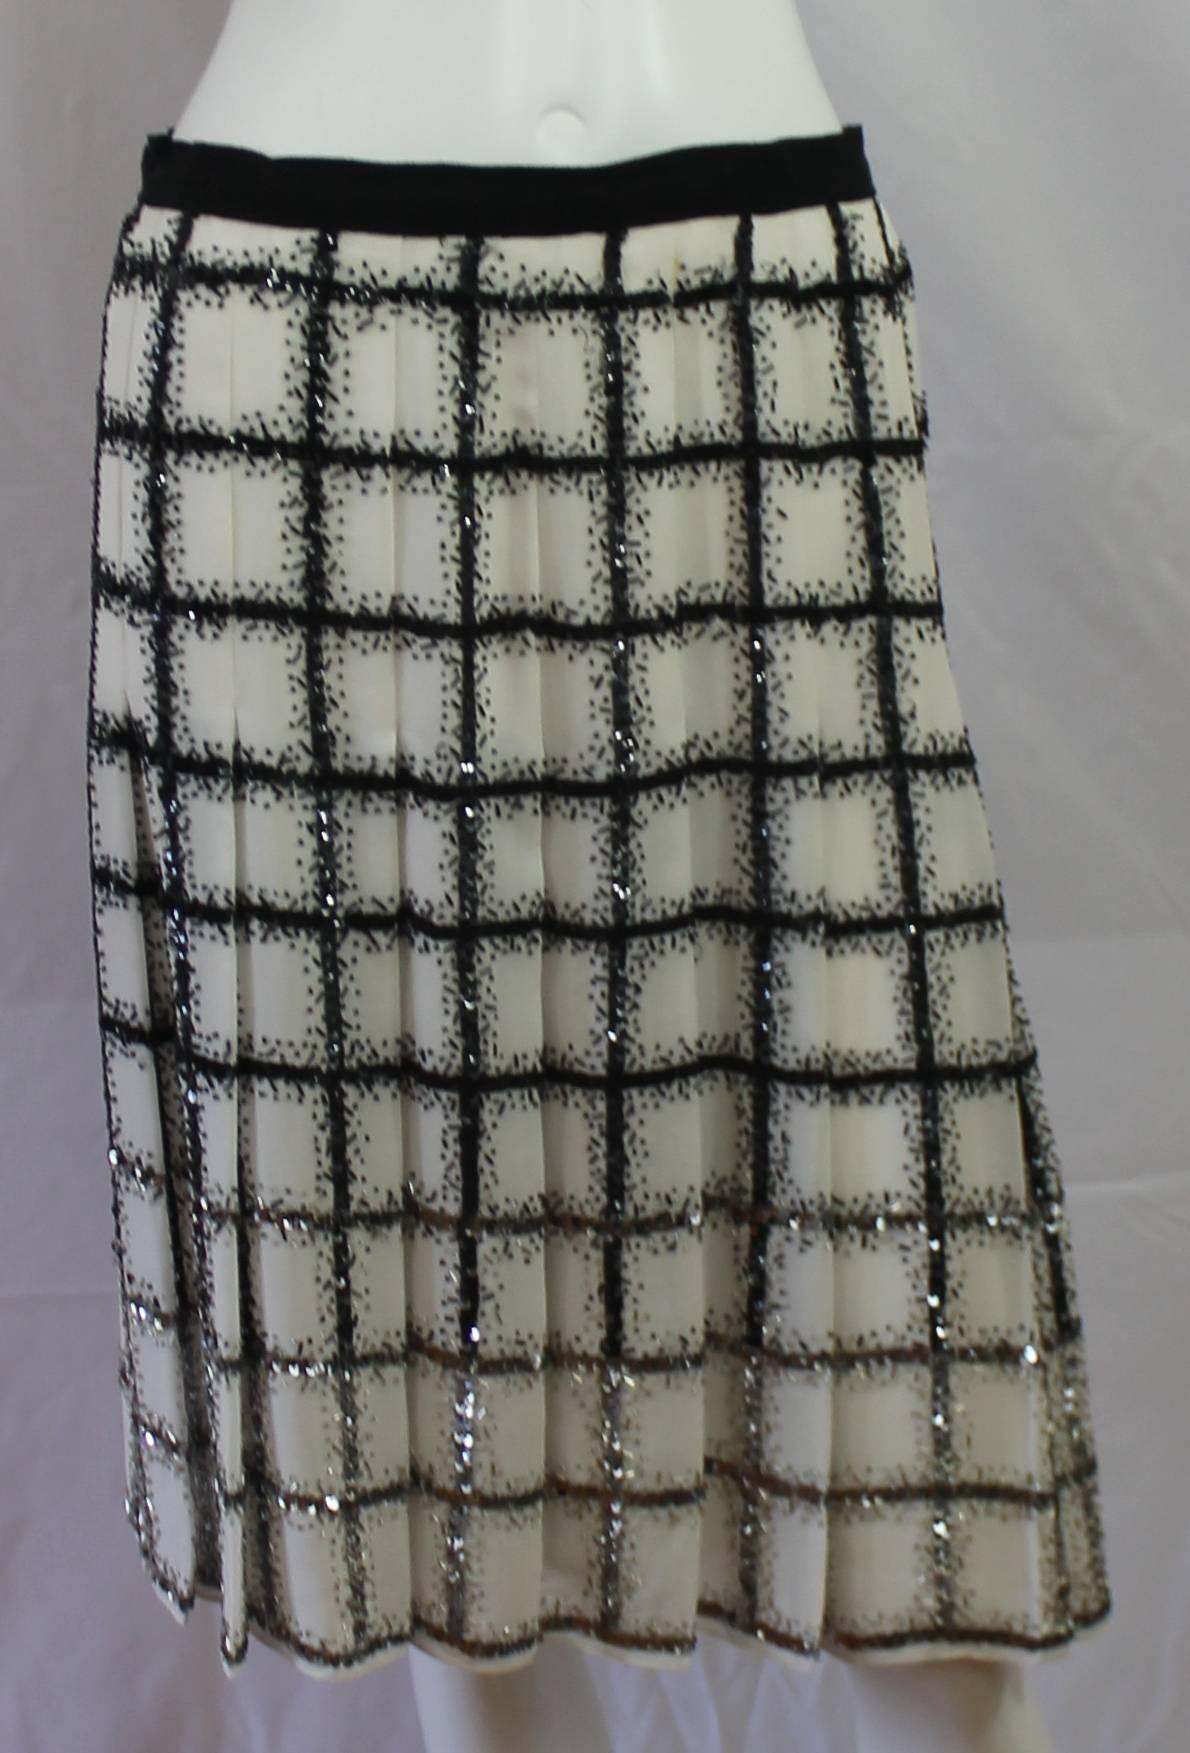 Oscar de la Renta Ivory & Black silk chiffon window pane black and silver beaded/sequin pleated skirt - 4 This amazing skirt has a black grosgrain ribbon at waistline w/ a zipper at center back. The skirt is fitted to the hip (aprox 8 inches from